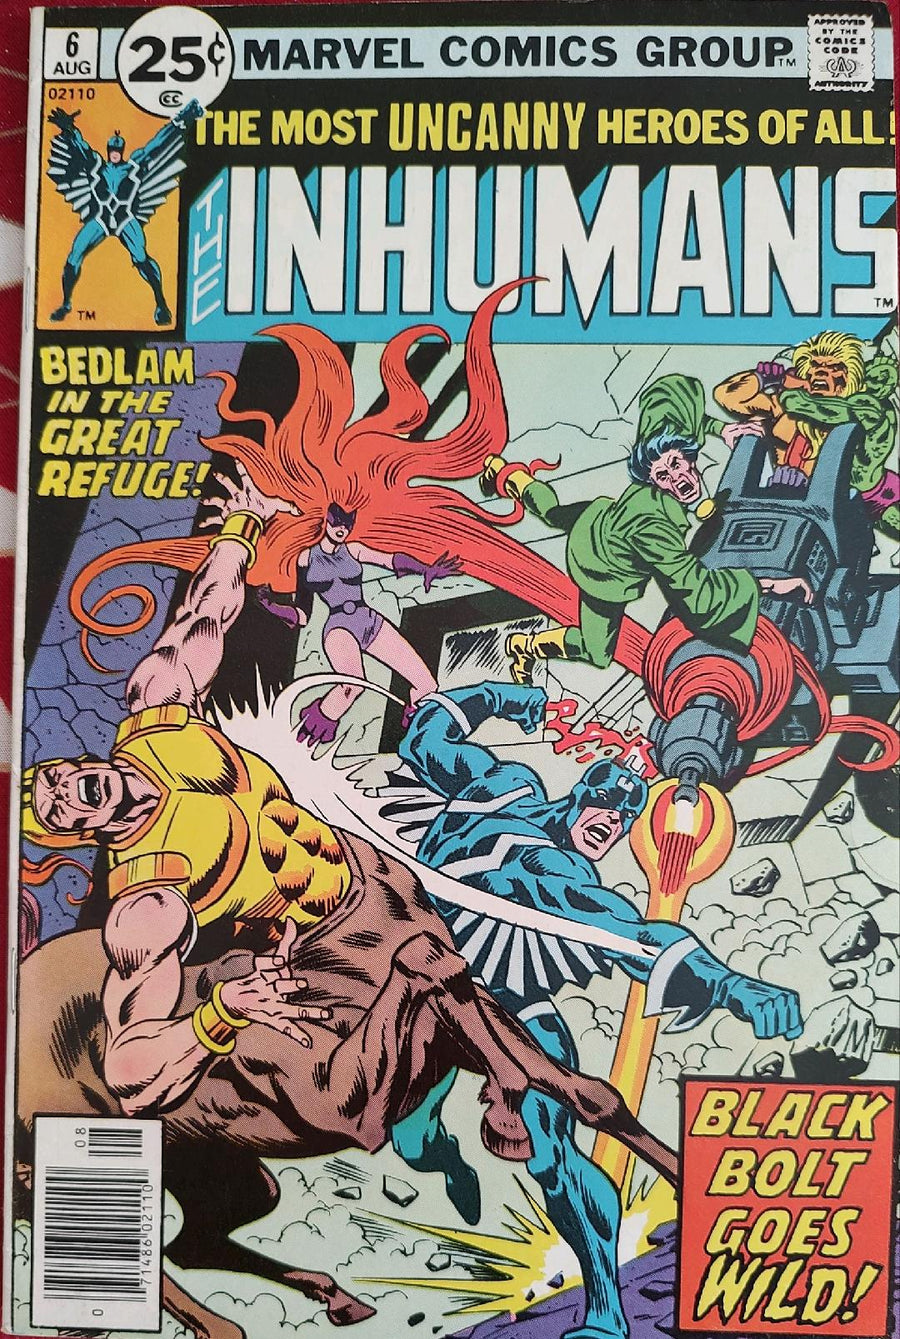 The Inhumans #6 Comic Book Cover